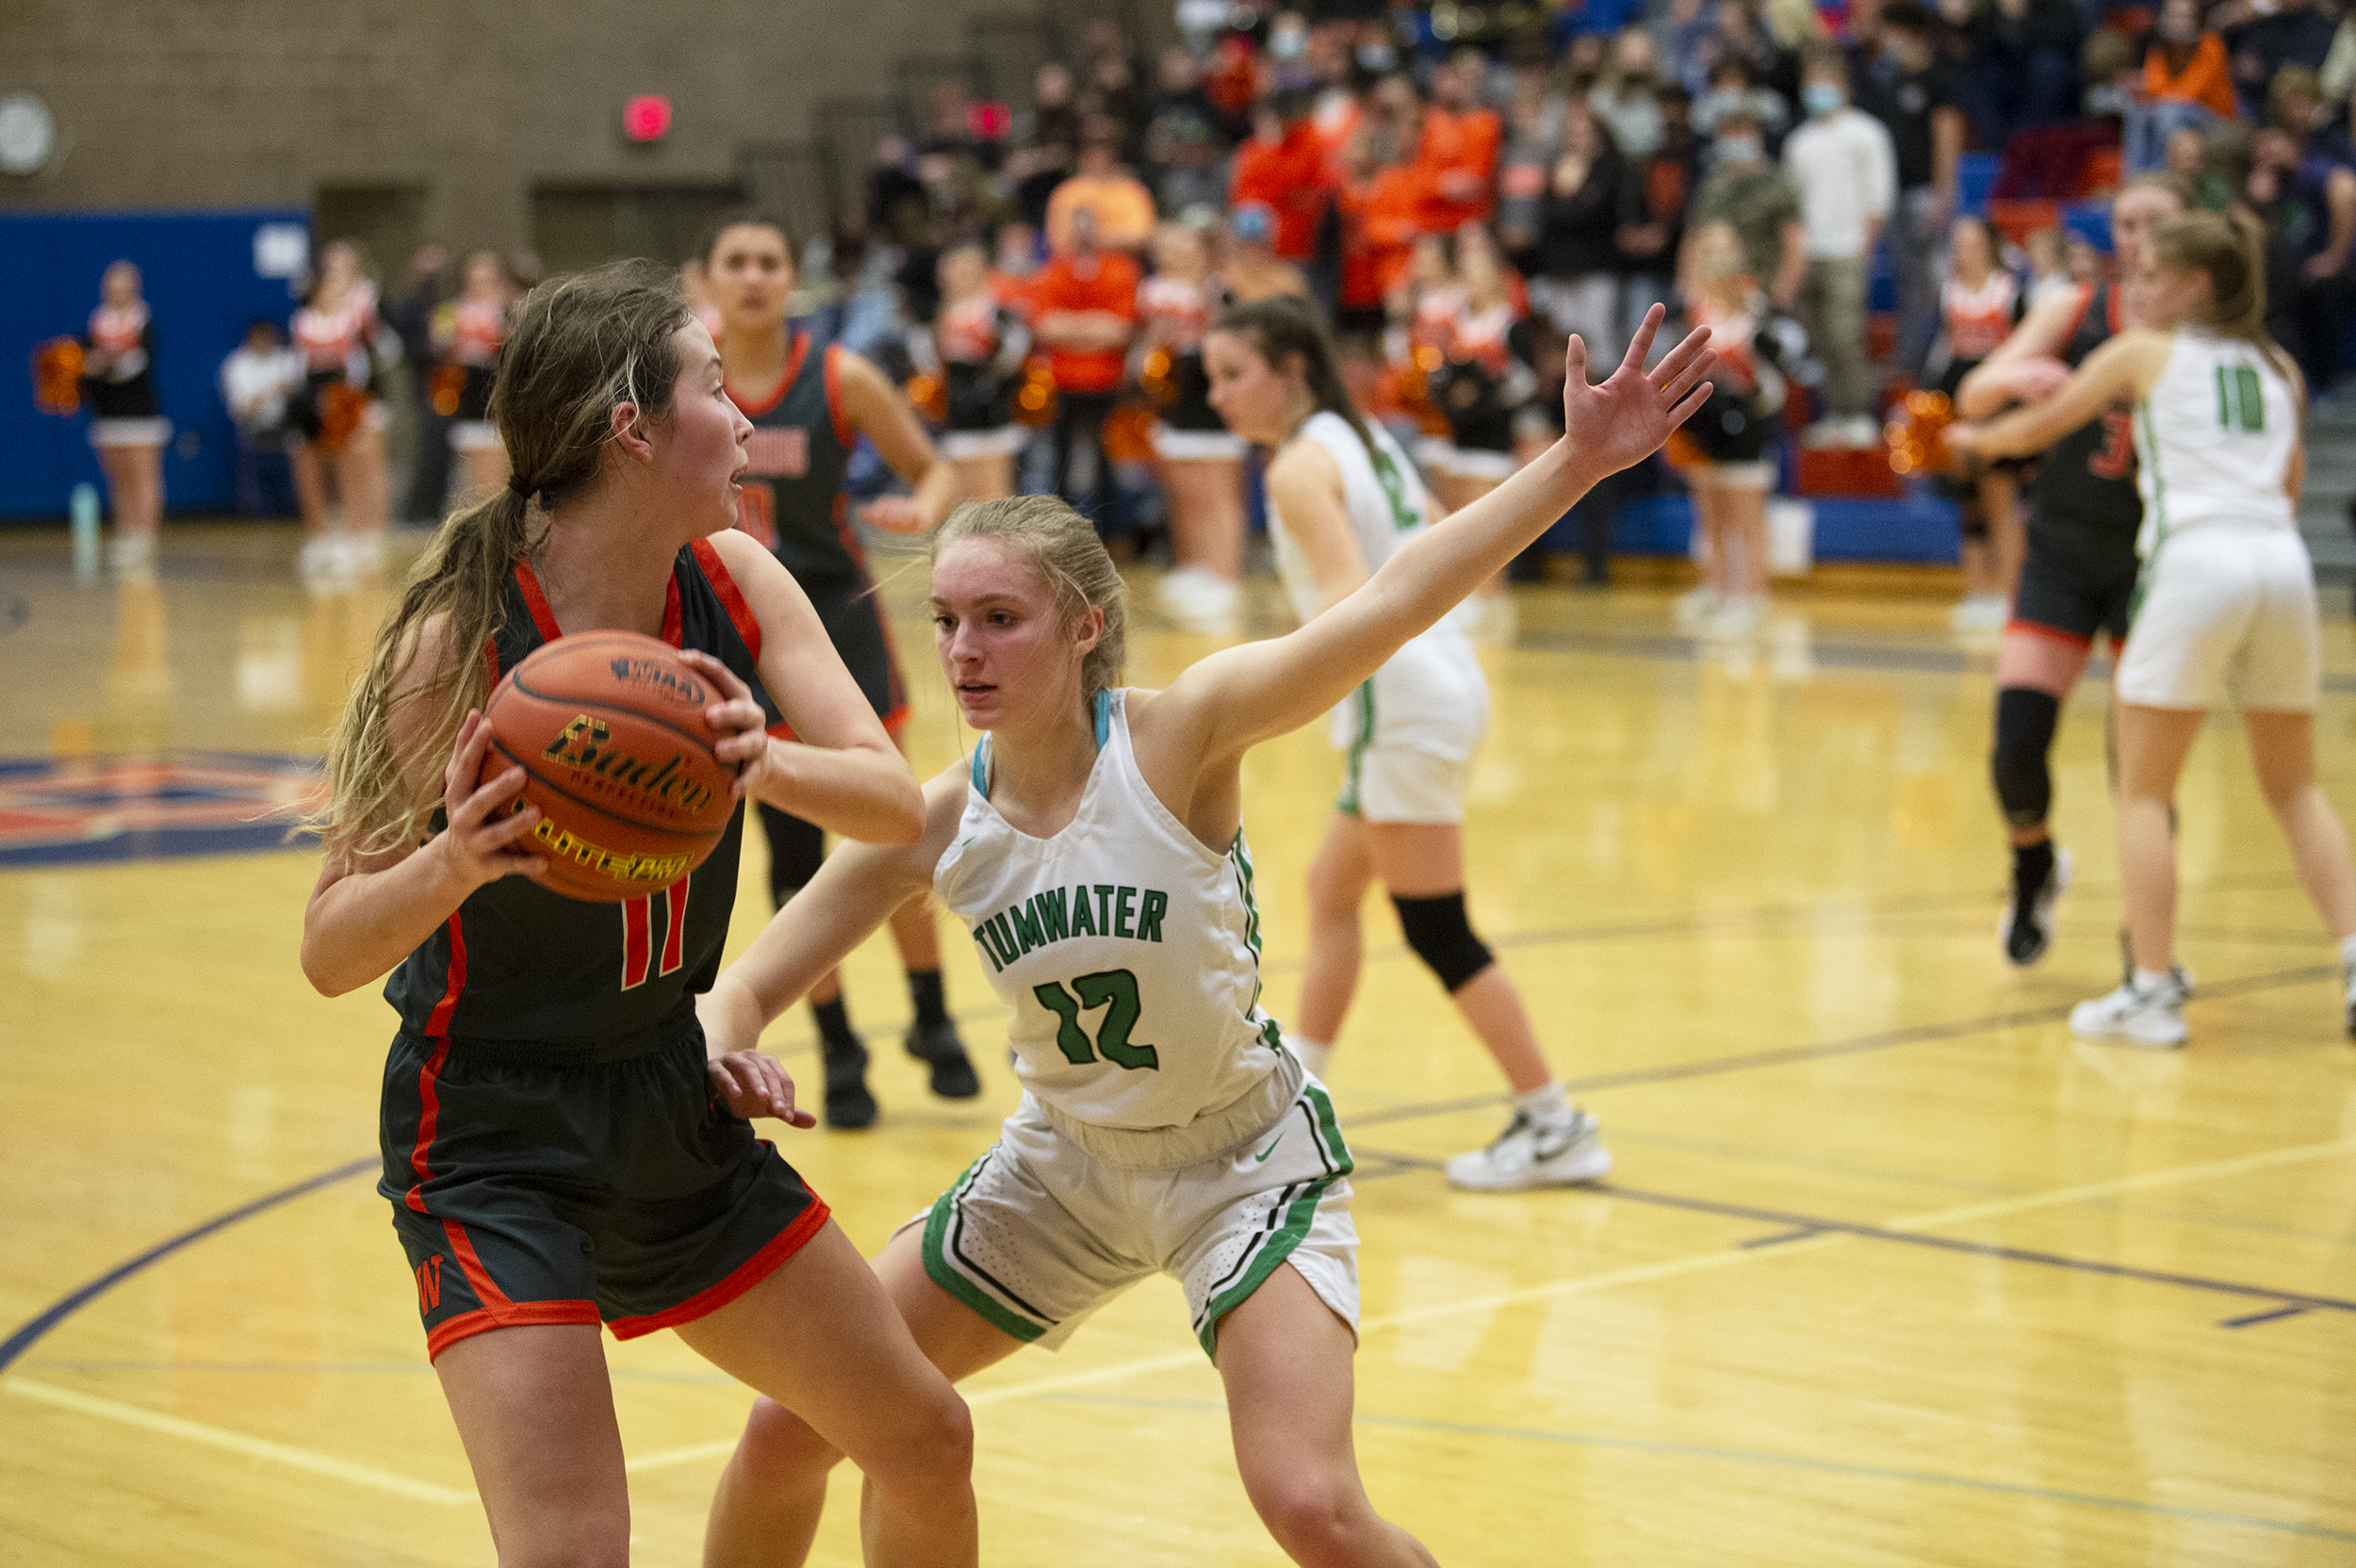 Washougal's Samantha Mederos is defended by Tumwater's Aubrey Amendala during the 2A girls basketball district semifinal on Monday in Ridgefield (Tim Martinez/The Columbian)